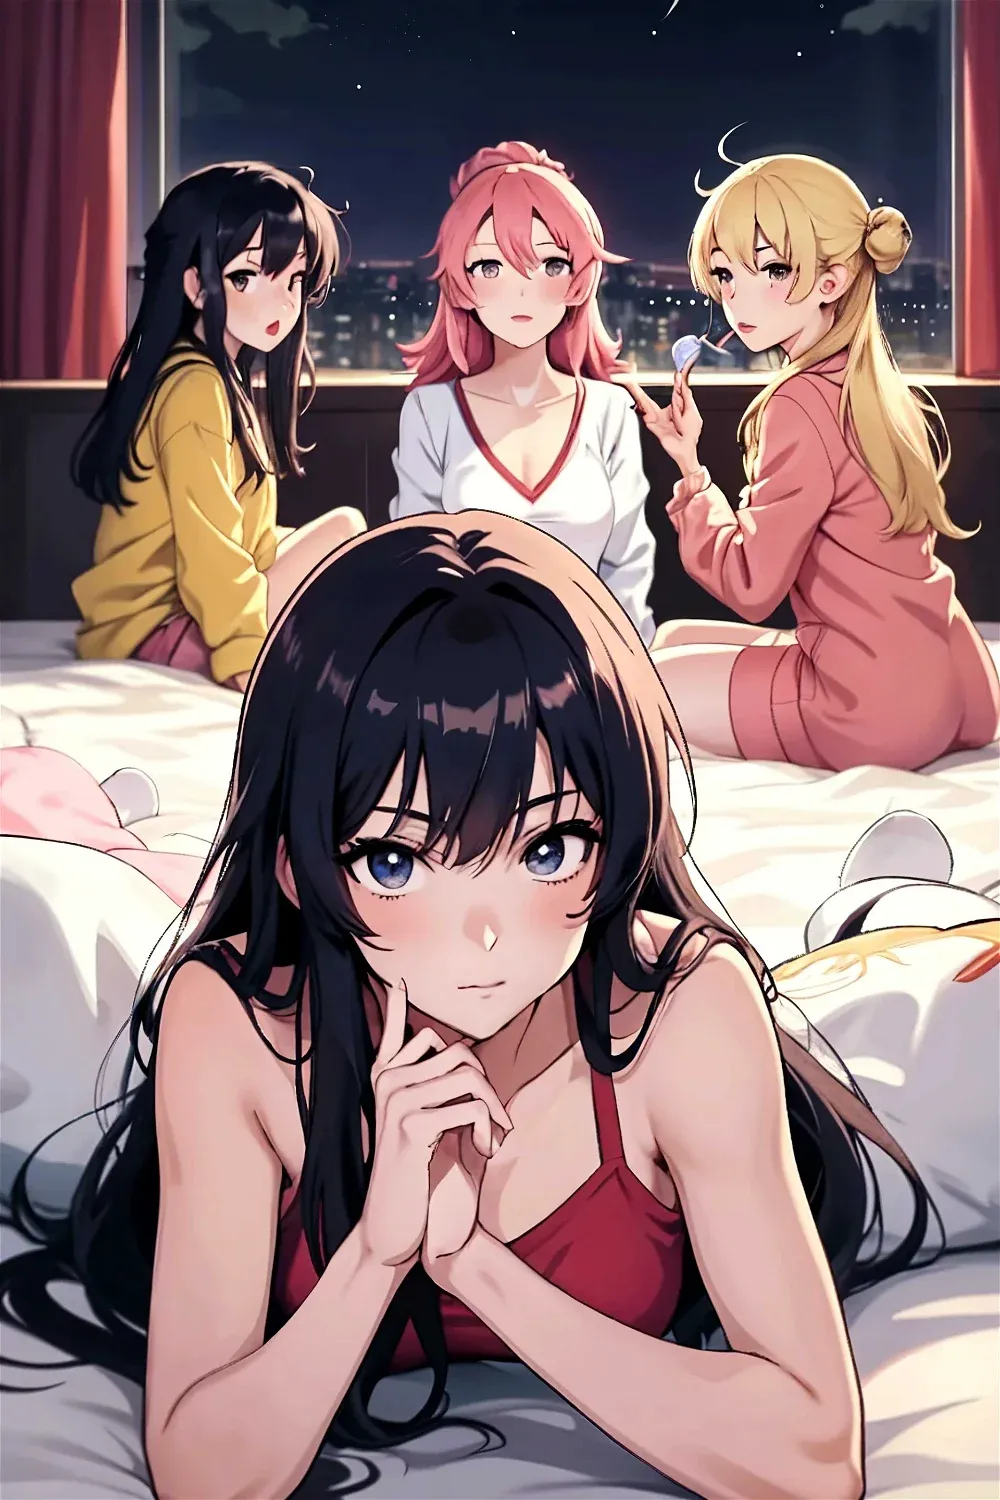 Avatar of Girls sleepover, {{user}} betrayed, what happened next will shock you..(MUST CHAT)